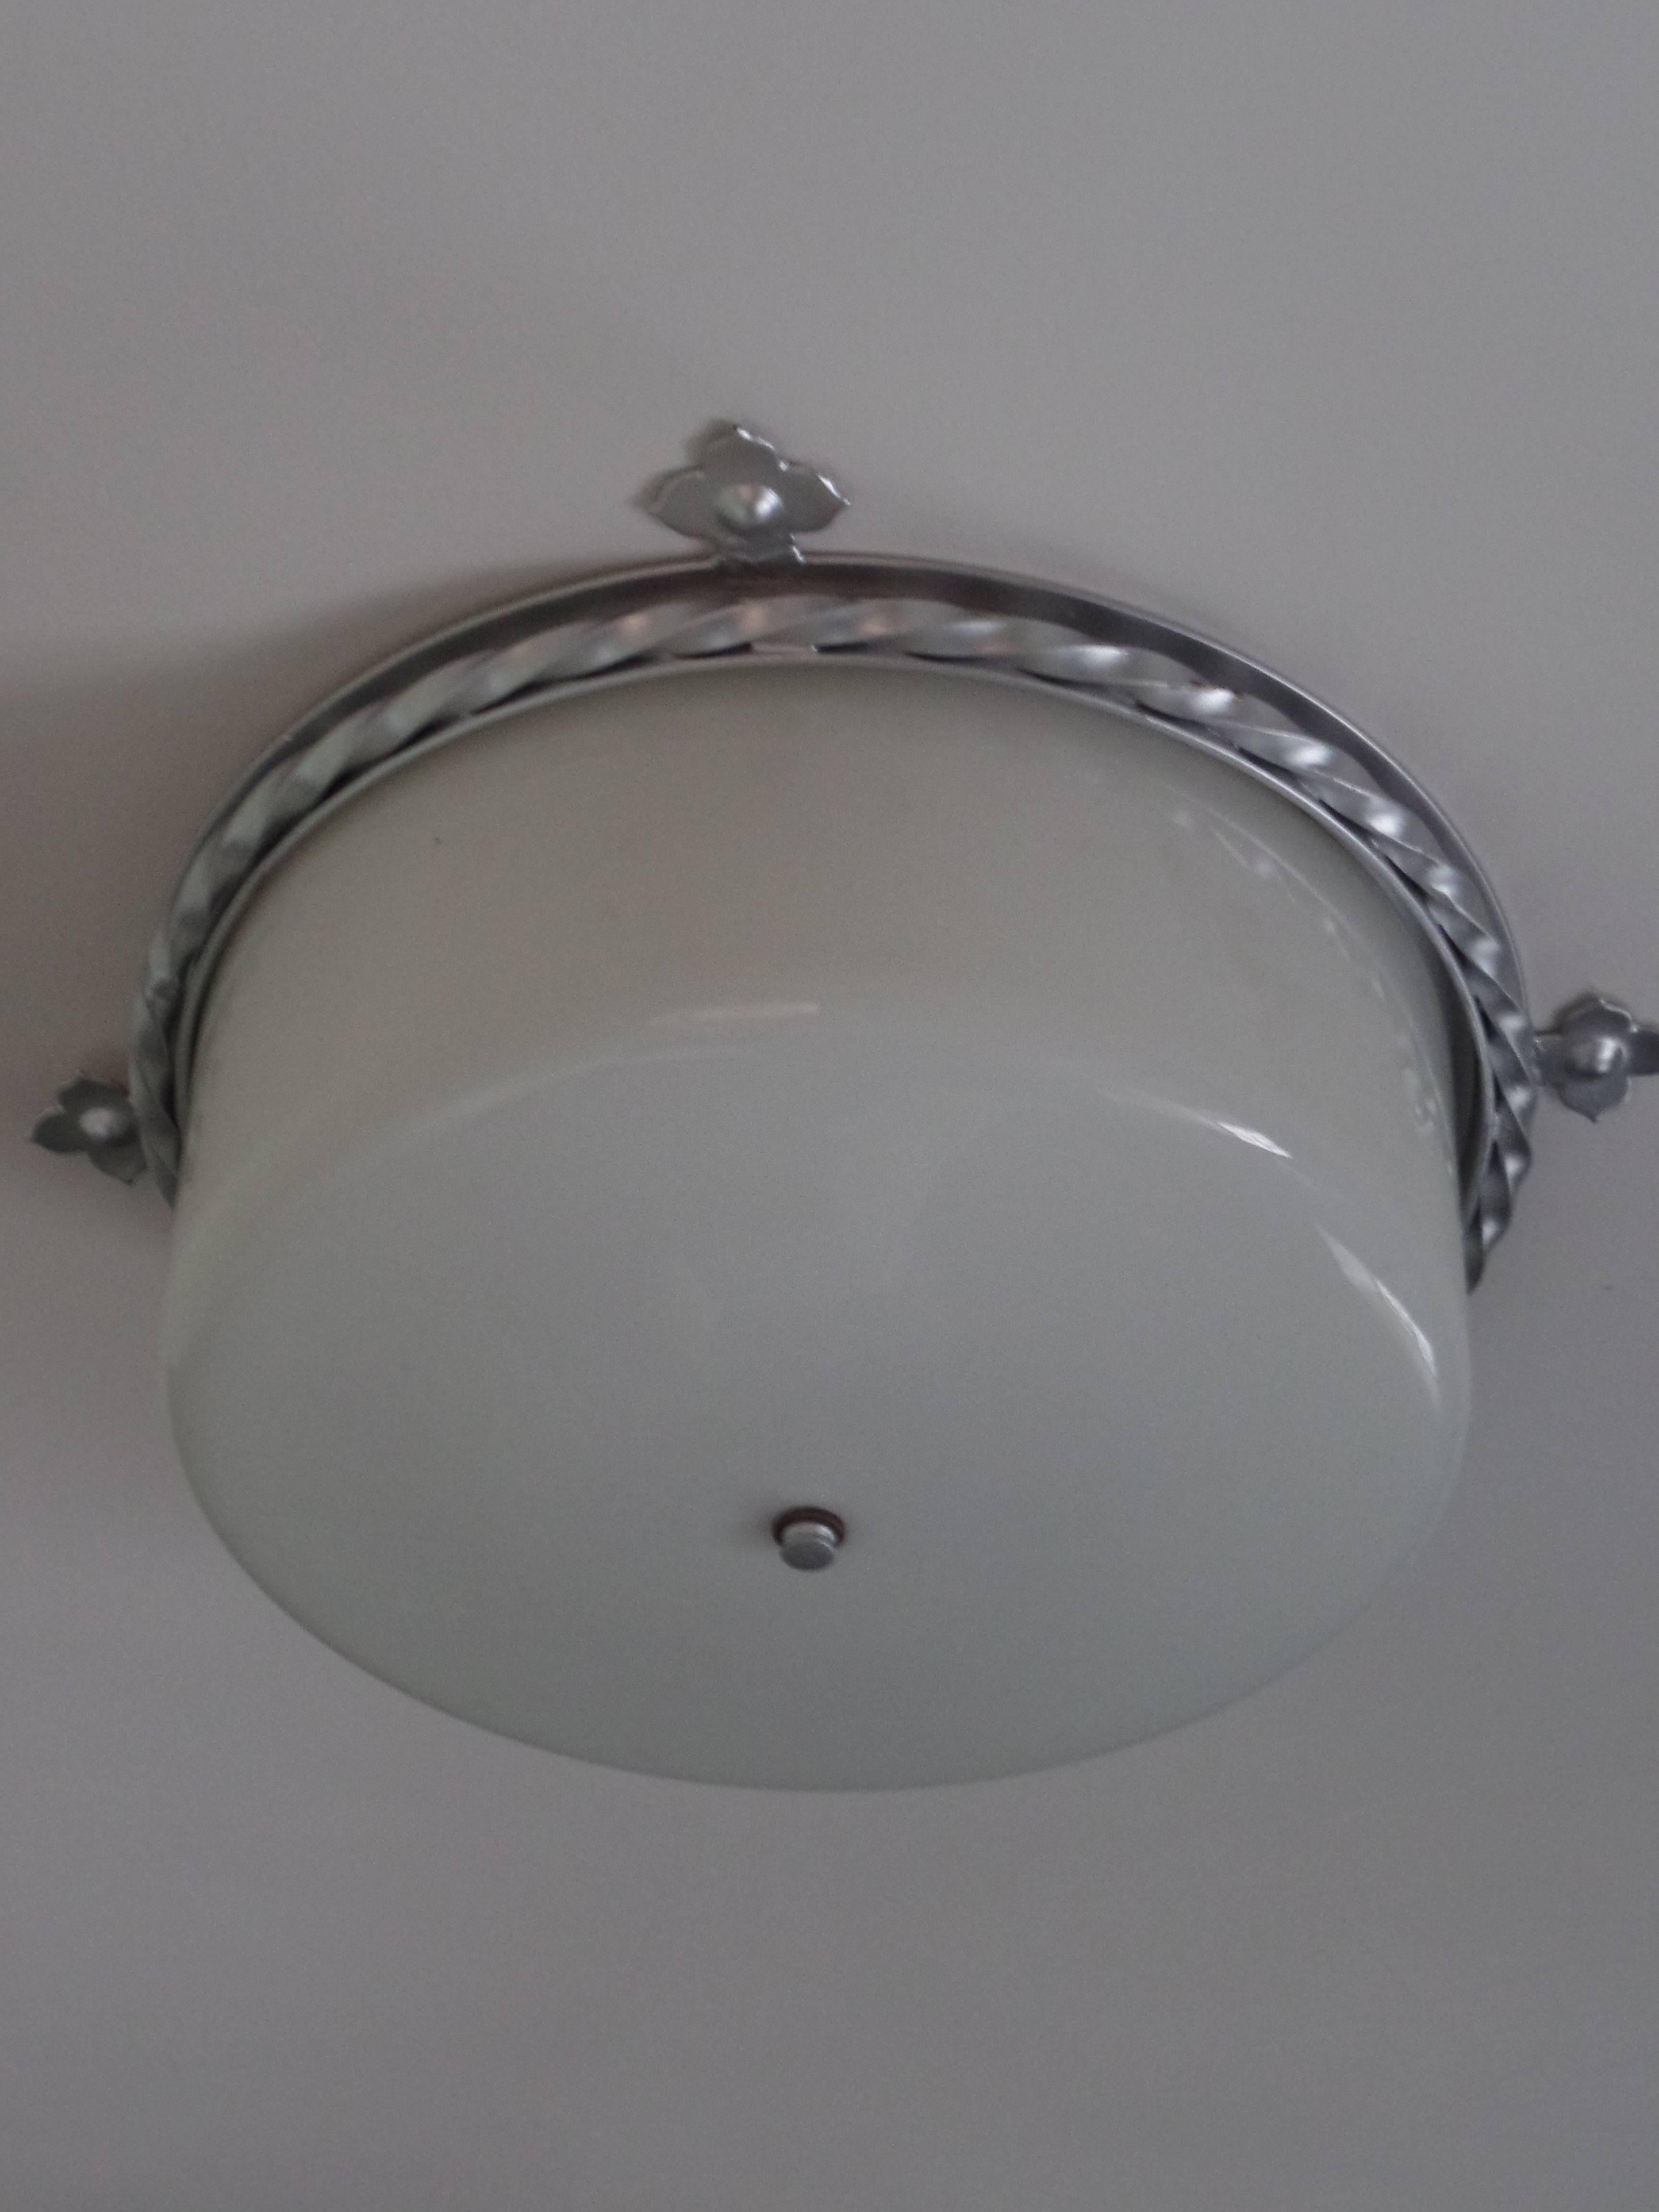 Elegant French mid-century flush mount ceiling lighting fixture composed of a silvered hand-wrought iron frame with an opaque thick milk glass reflector.

The frame is silvered and composed of twisted hand-wrought iron with four surrounding